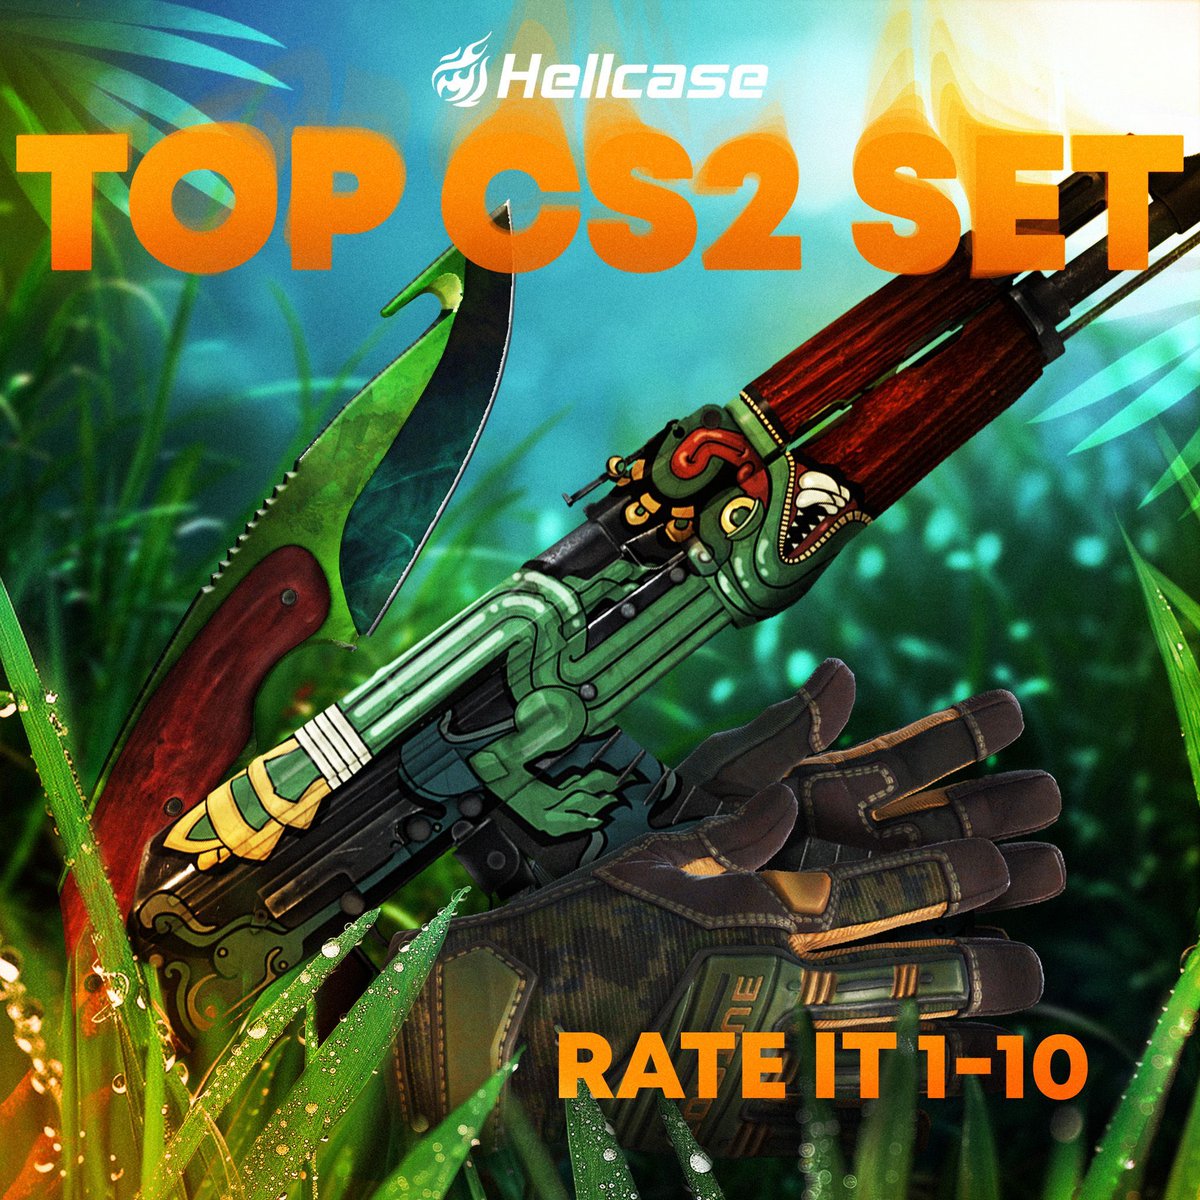 HELLCASE Best Counter-Strike 2 Case Openings, Upgrades, Battles and Giveaways, Daily Free Skins 
Visit now hellcase.com/fforever666

Use promo code 'forever666' for FREE balance and +10% deposit bonus

#Navi #cs2 #Faze #G2 #CS2Giveaway #freeskins  #Giveaway #Valve #faceit #Donk